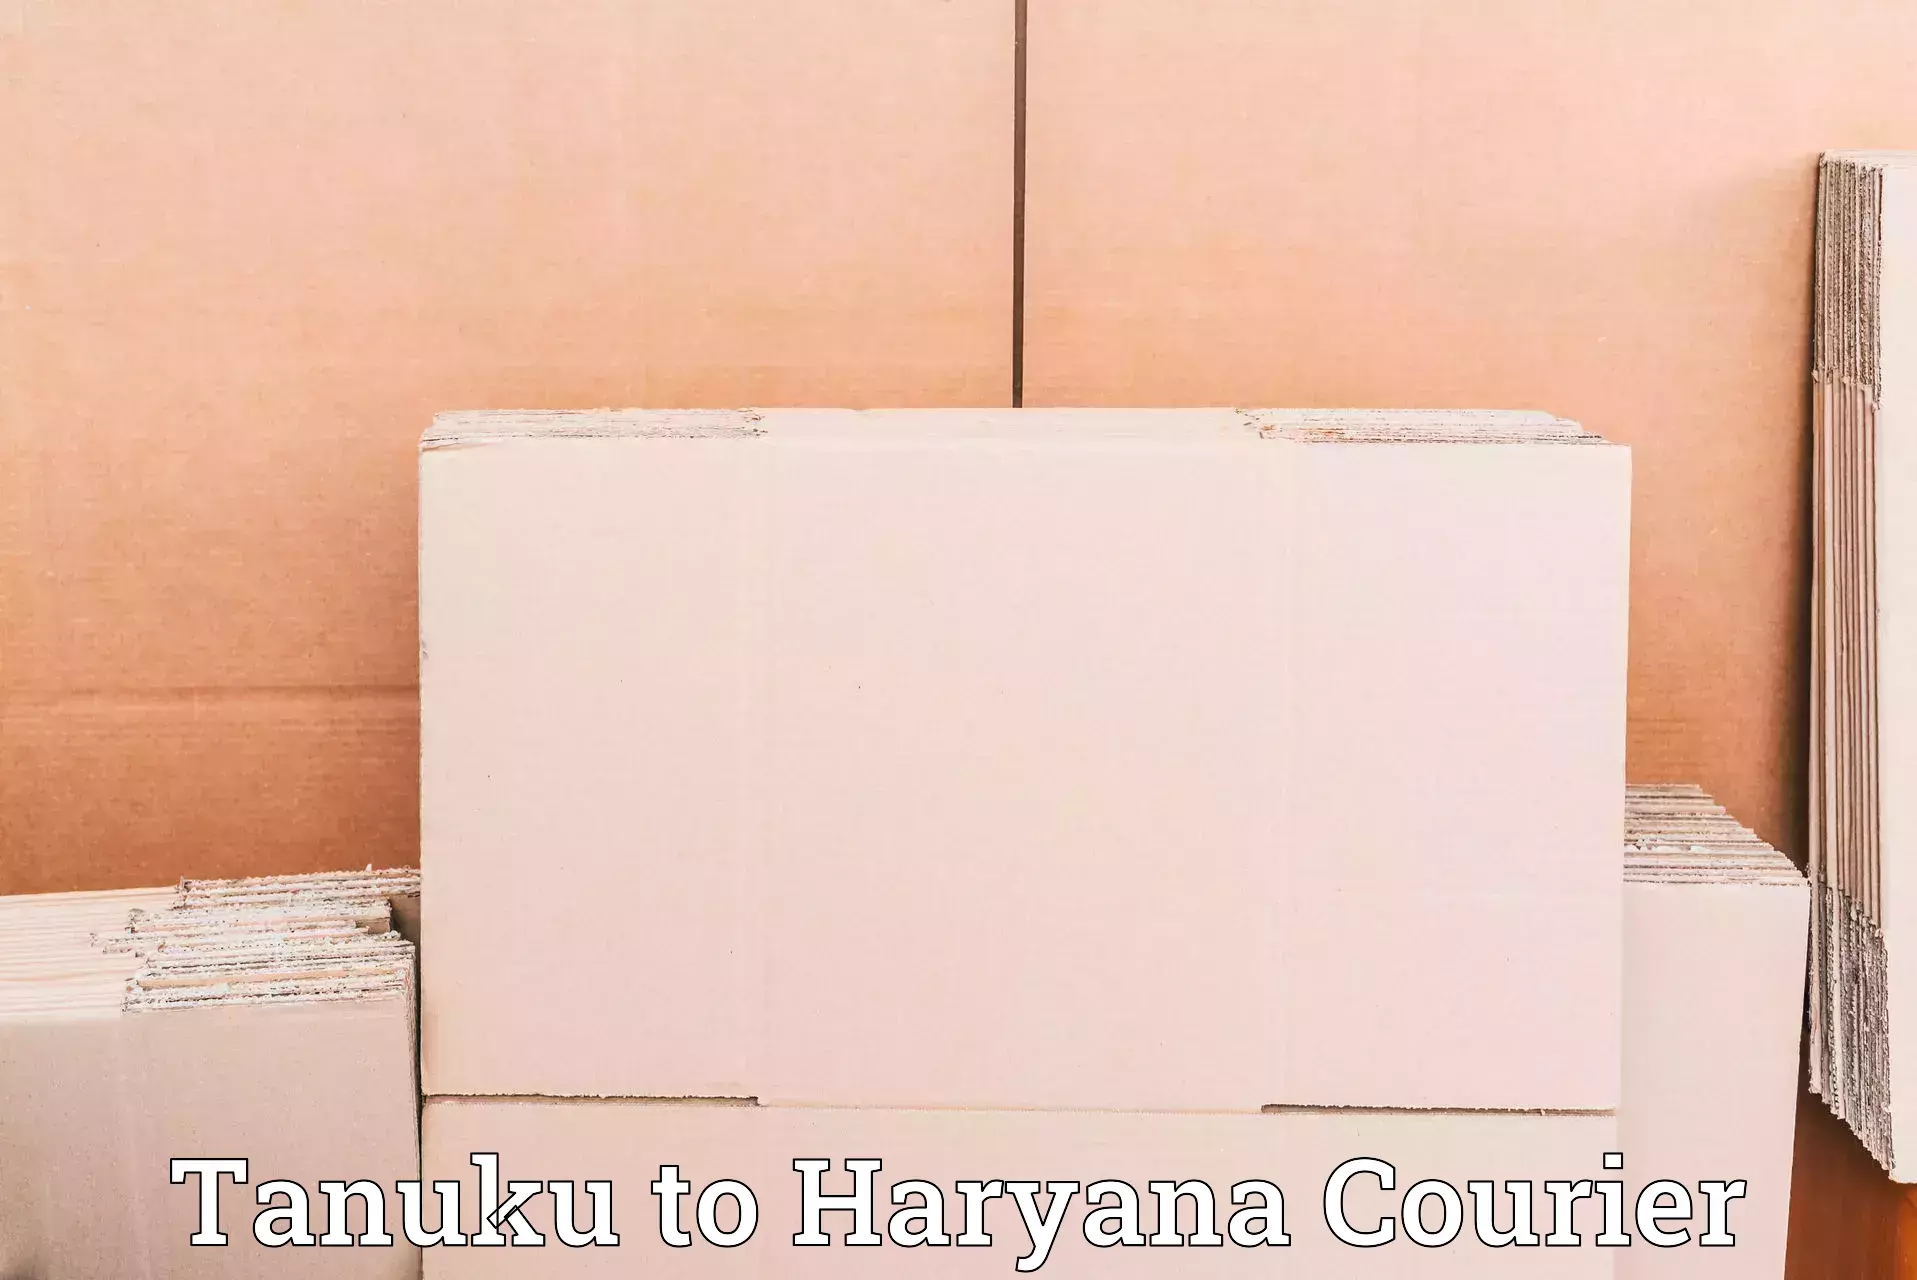 End-to-end delivery Tanuku to Haryana